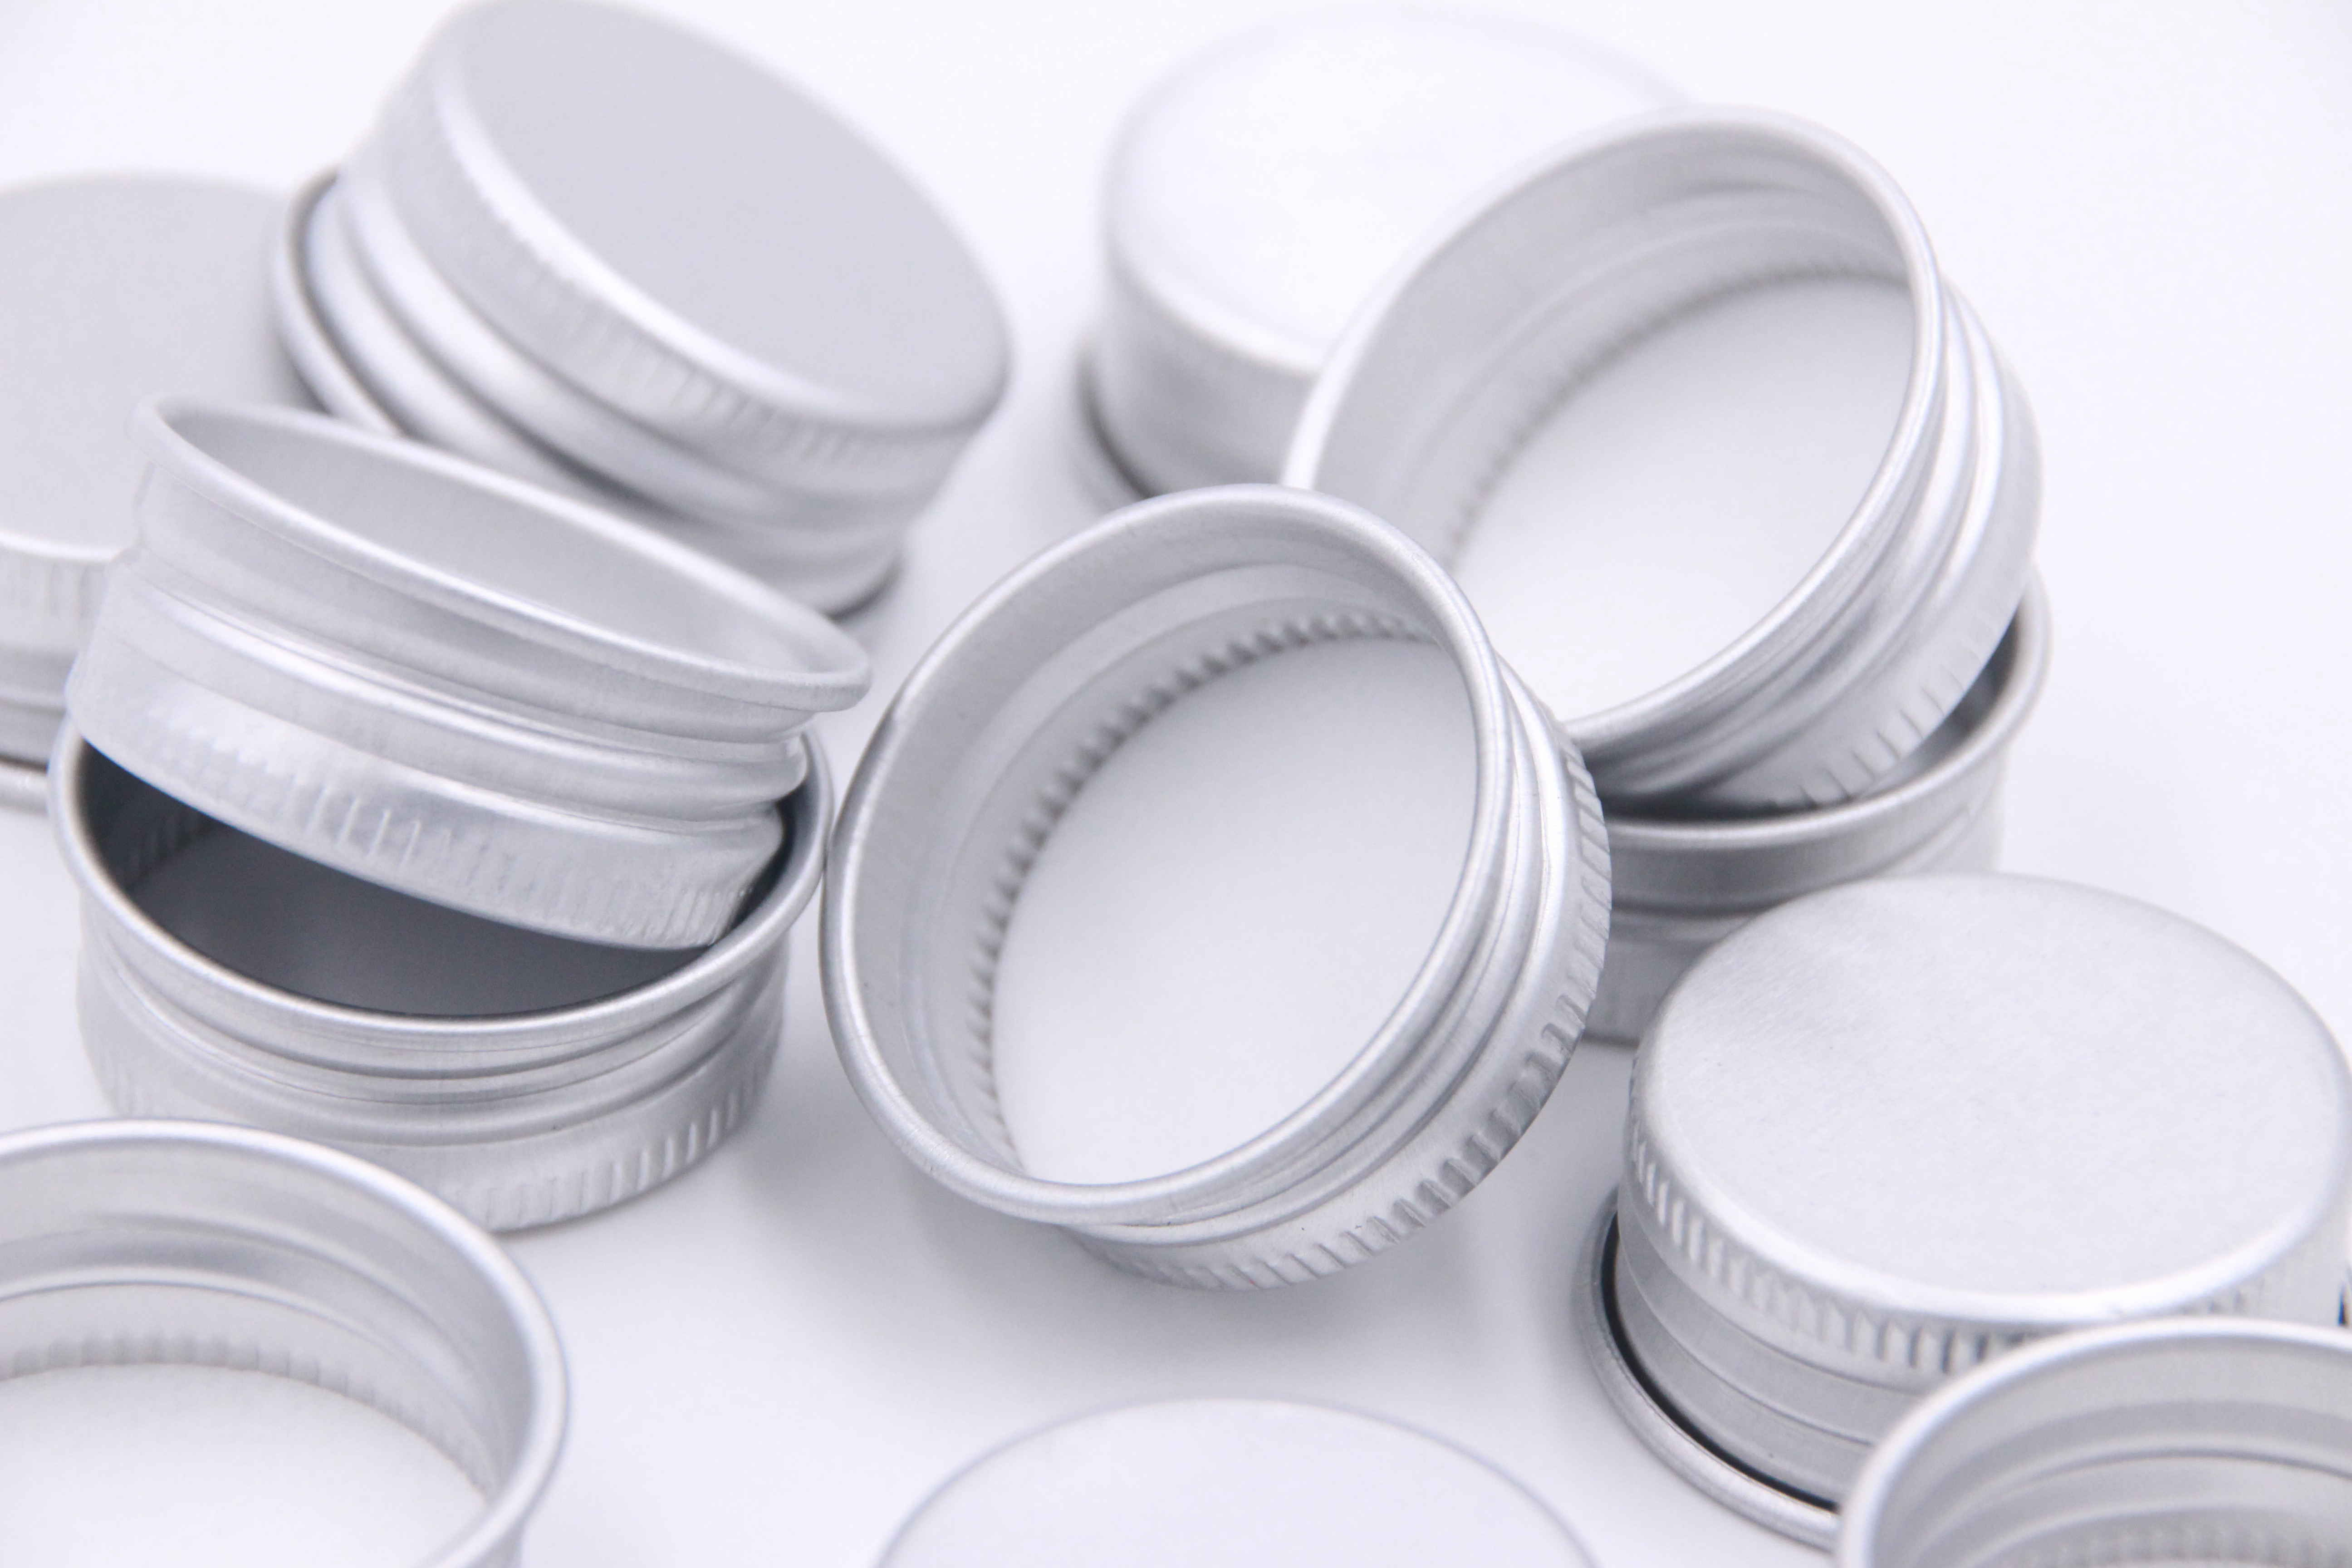 The quantity and main functions of the standard of aluminum-plastic caps